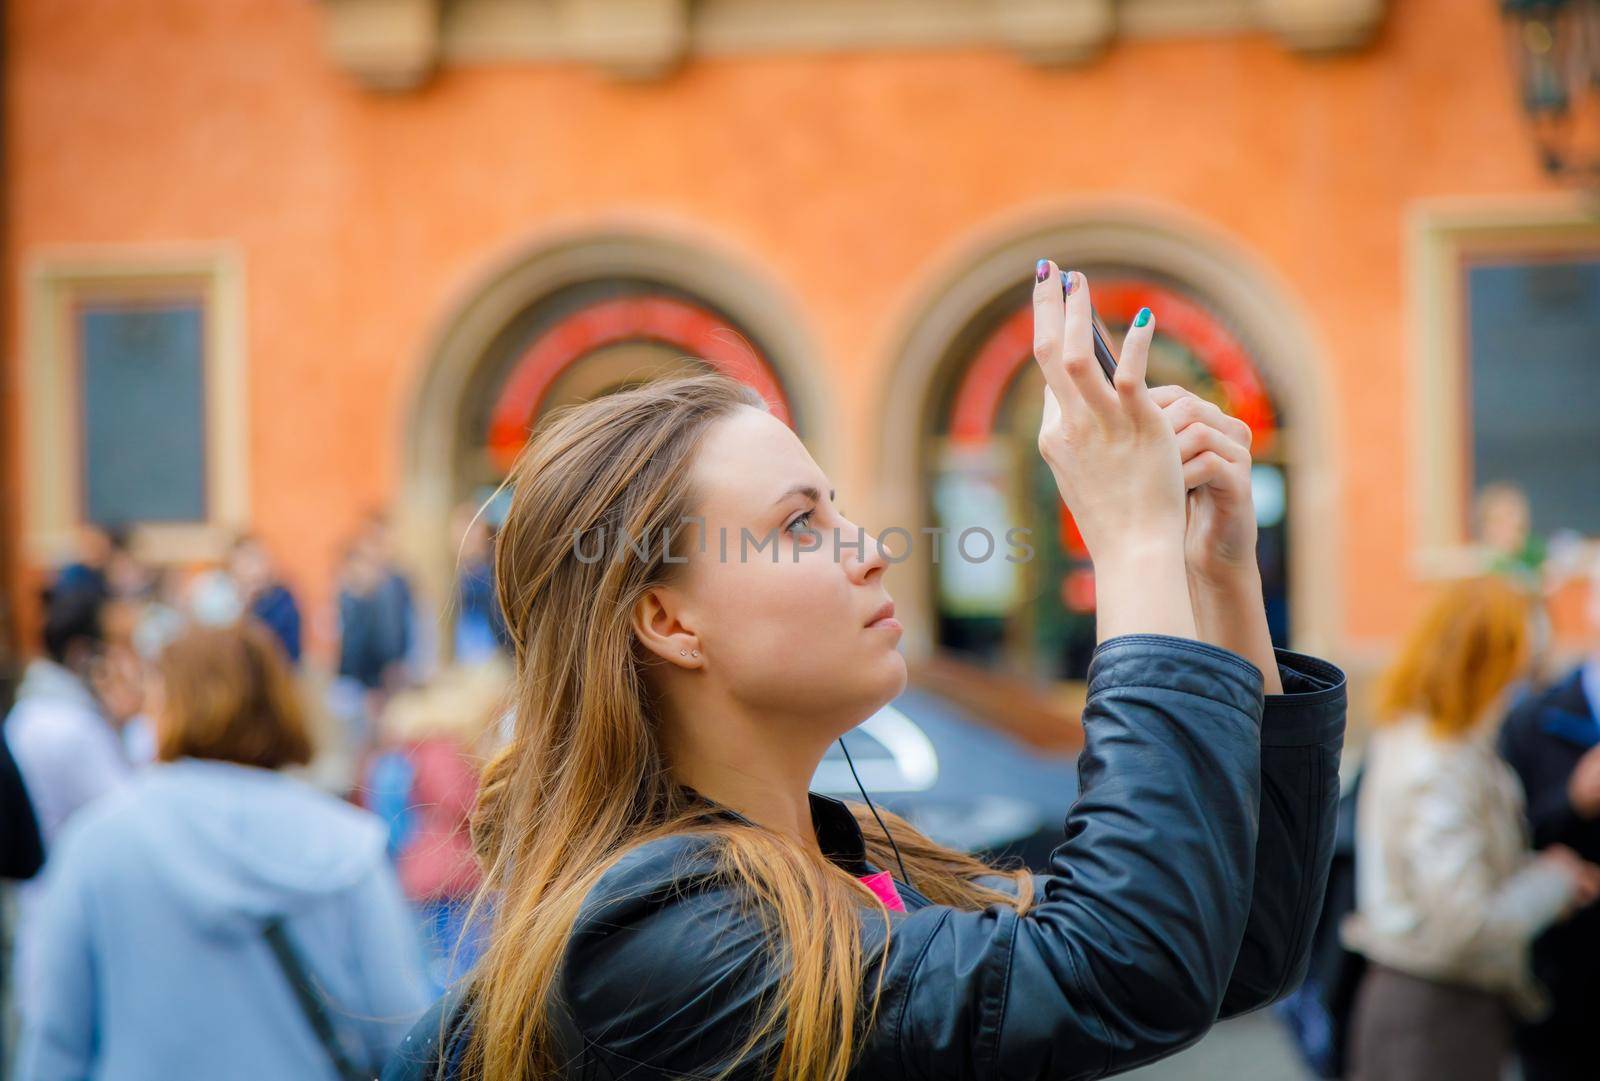 A young girl travels and takes pictures of the sights of the city on the phone by Yurich32